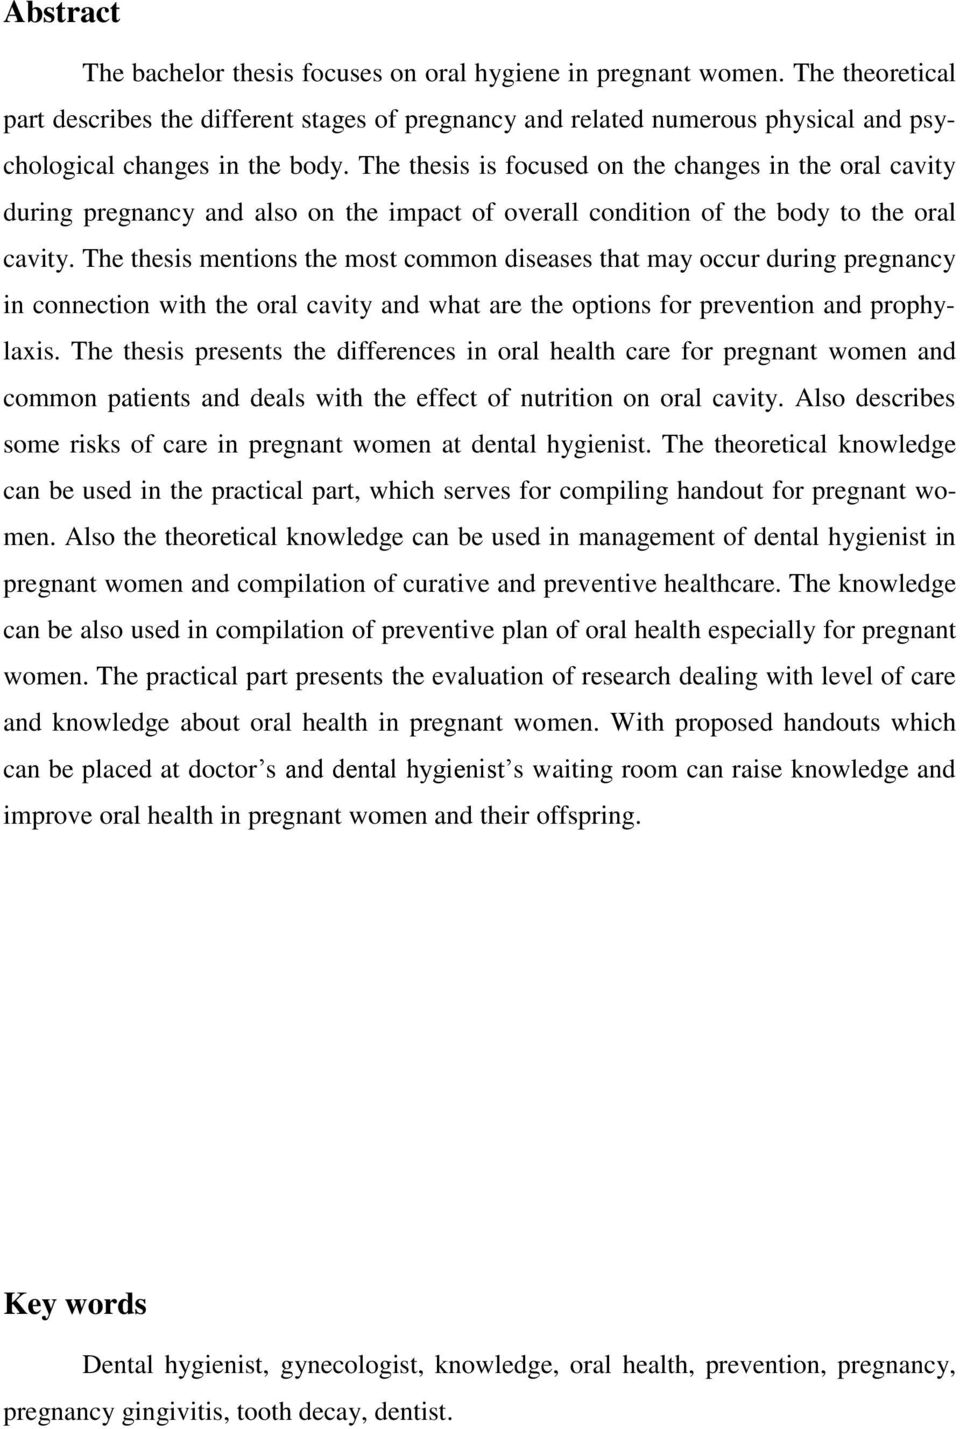 The thesis is focused on the changes in the oral cavity during pregnancy and also on the impact of overall condition of the body to the oral cavity.